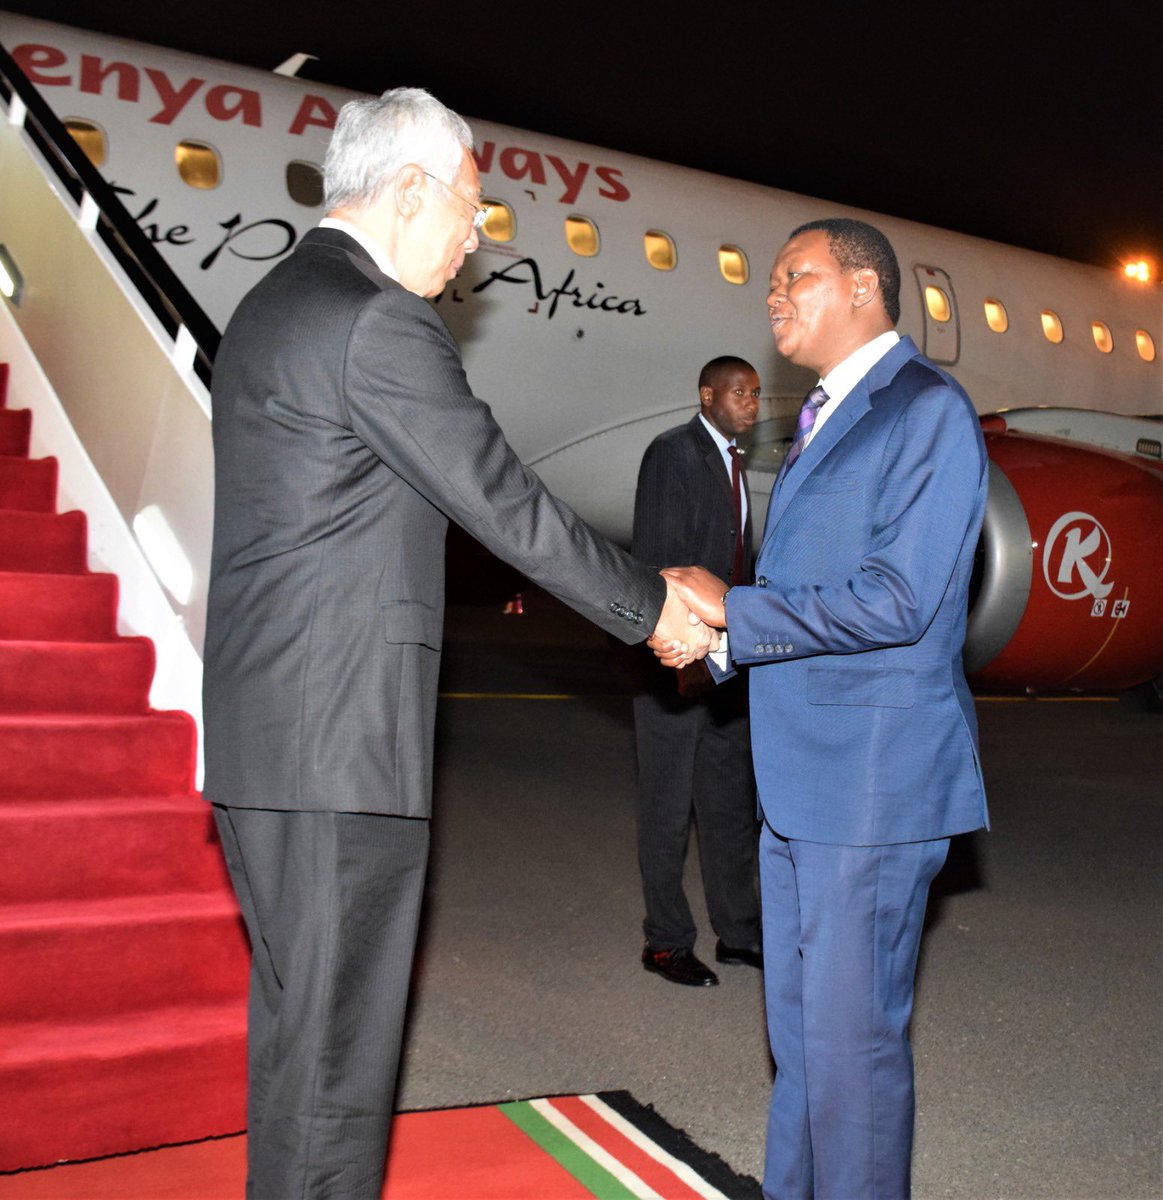 #JamboKenya Singapore Prime Minister is in Kenya for a 2 day officail visit.